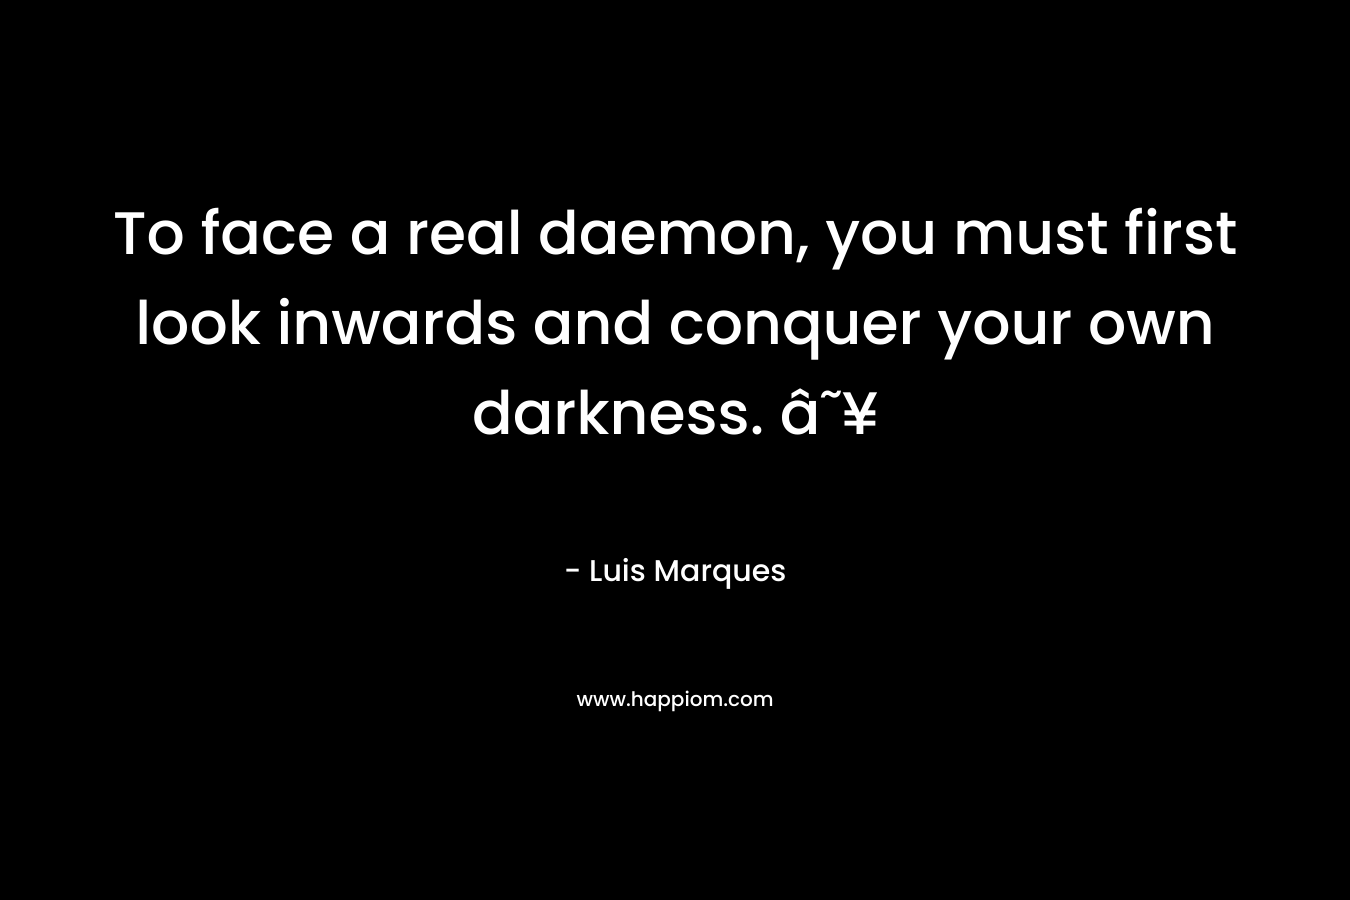 To face a real daemon, you must first look inwards and conquer your own darkness. â˜¥ – Luis Marques